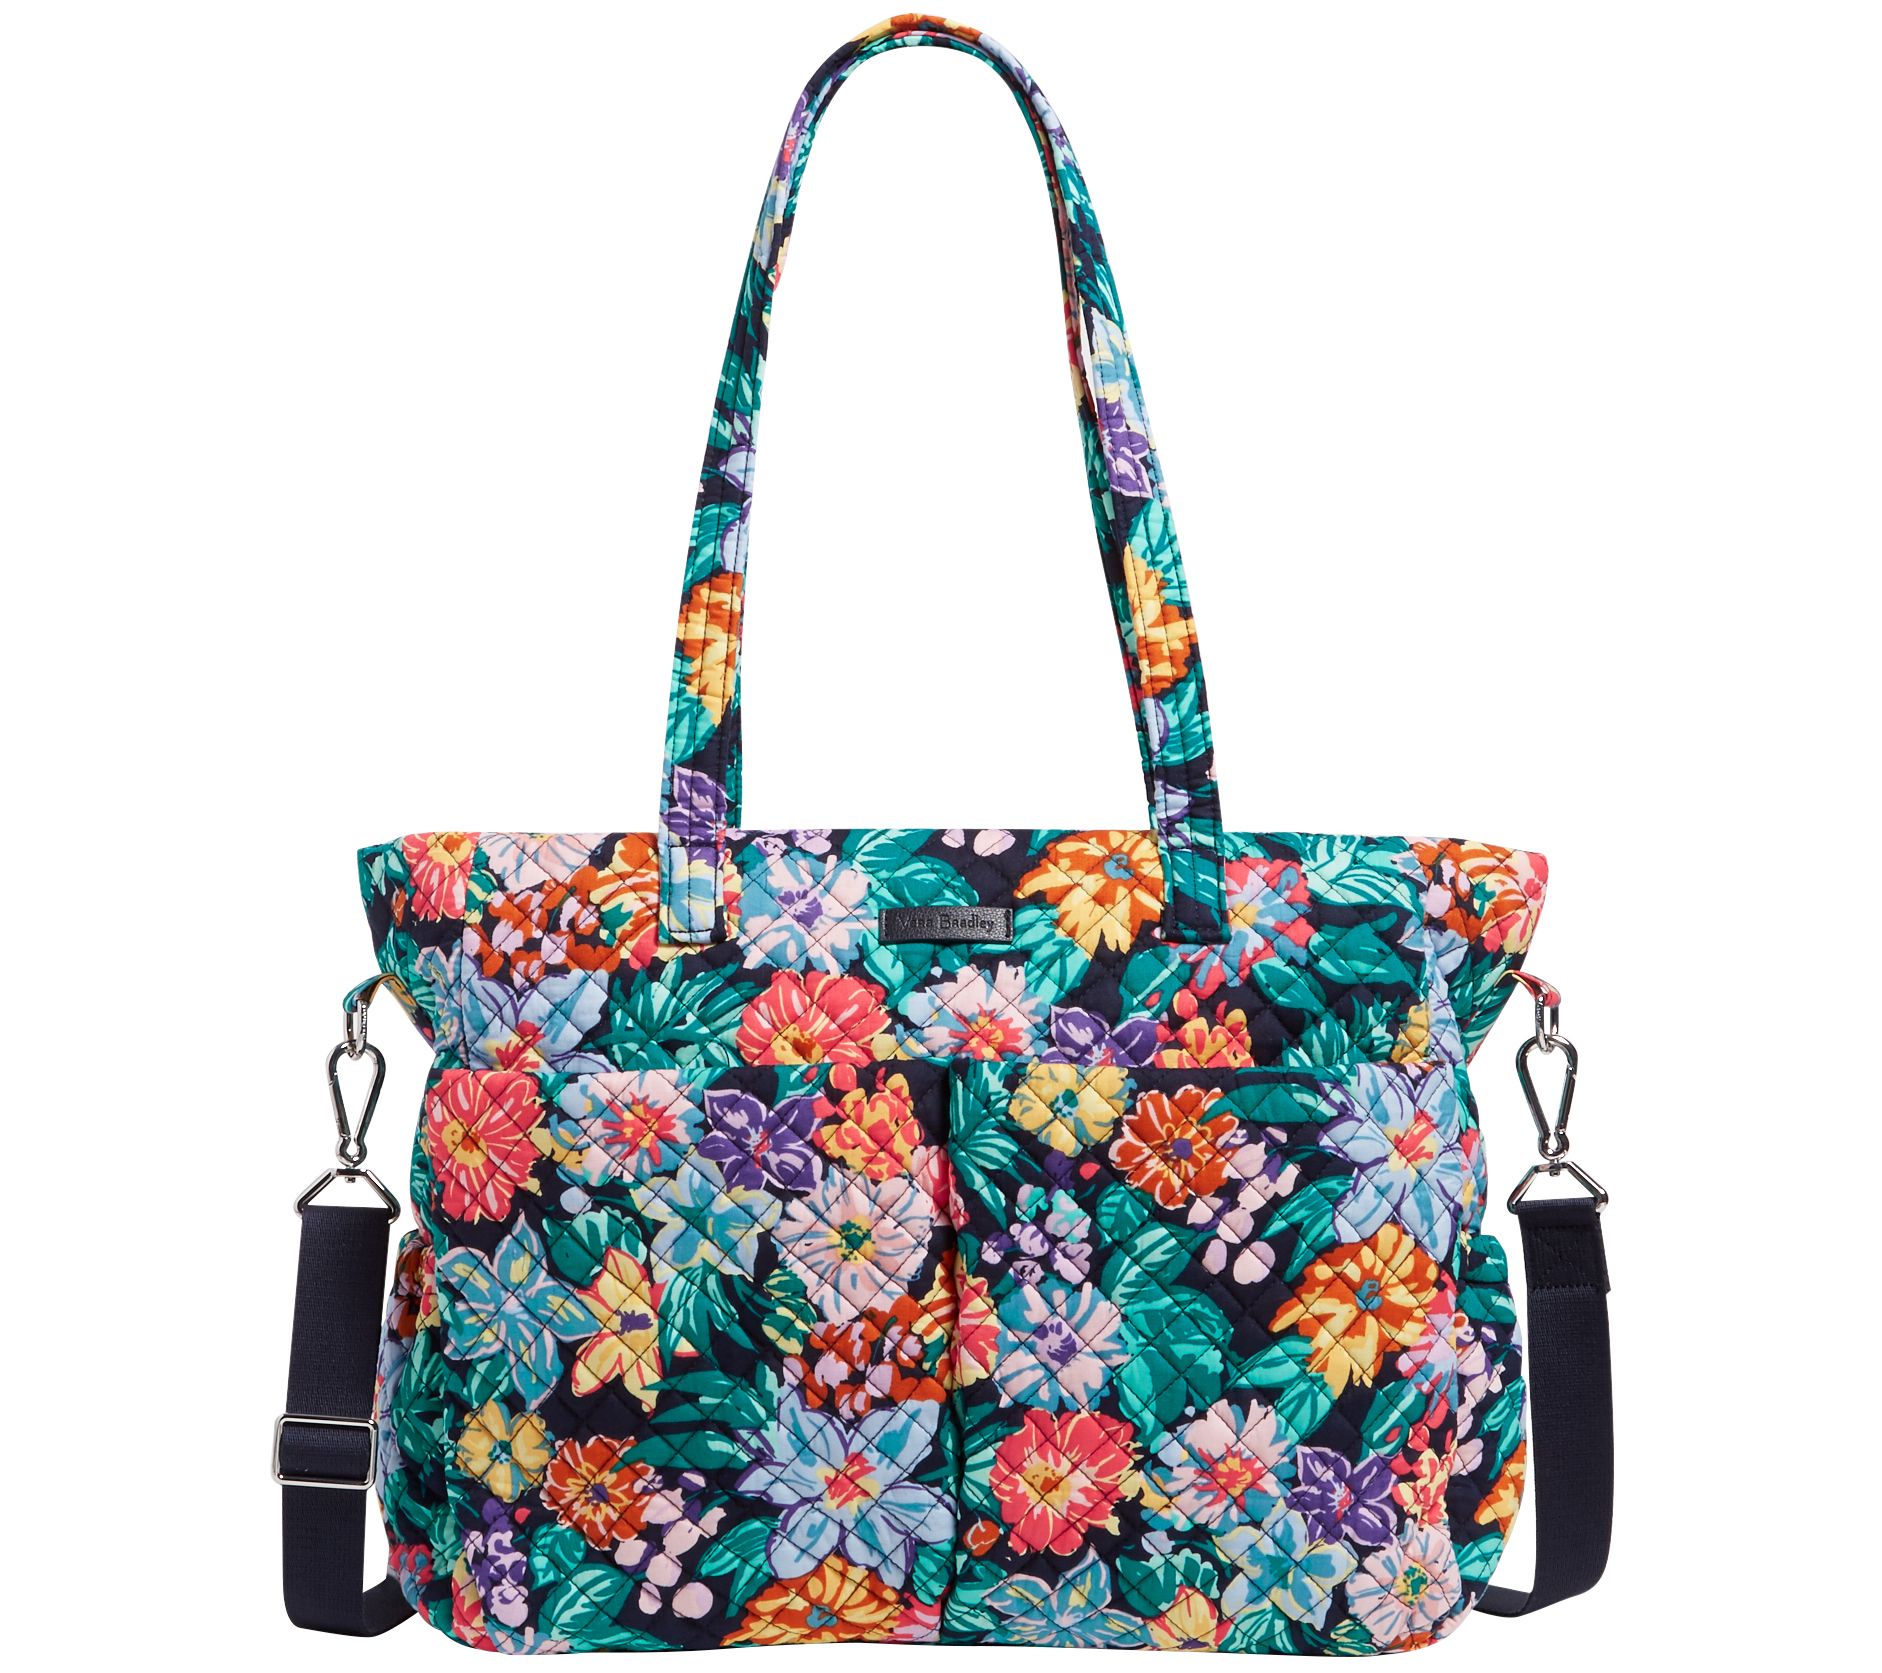 Vera Bradley - The Iconic Ultimate Diaper Bag is the gift that will live by  any new mom's side. We've thought of everything mom might need from  insulated pockets for bottles to